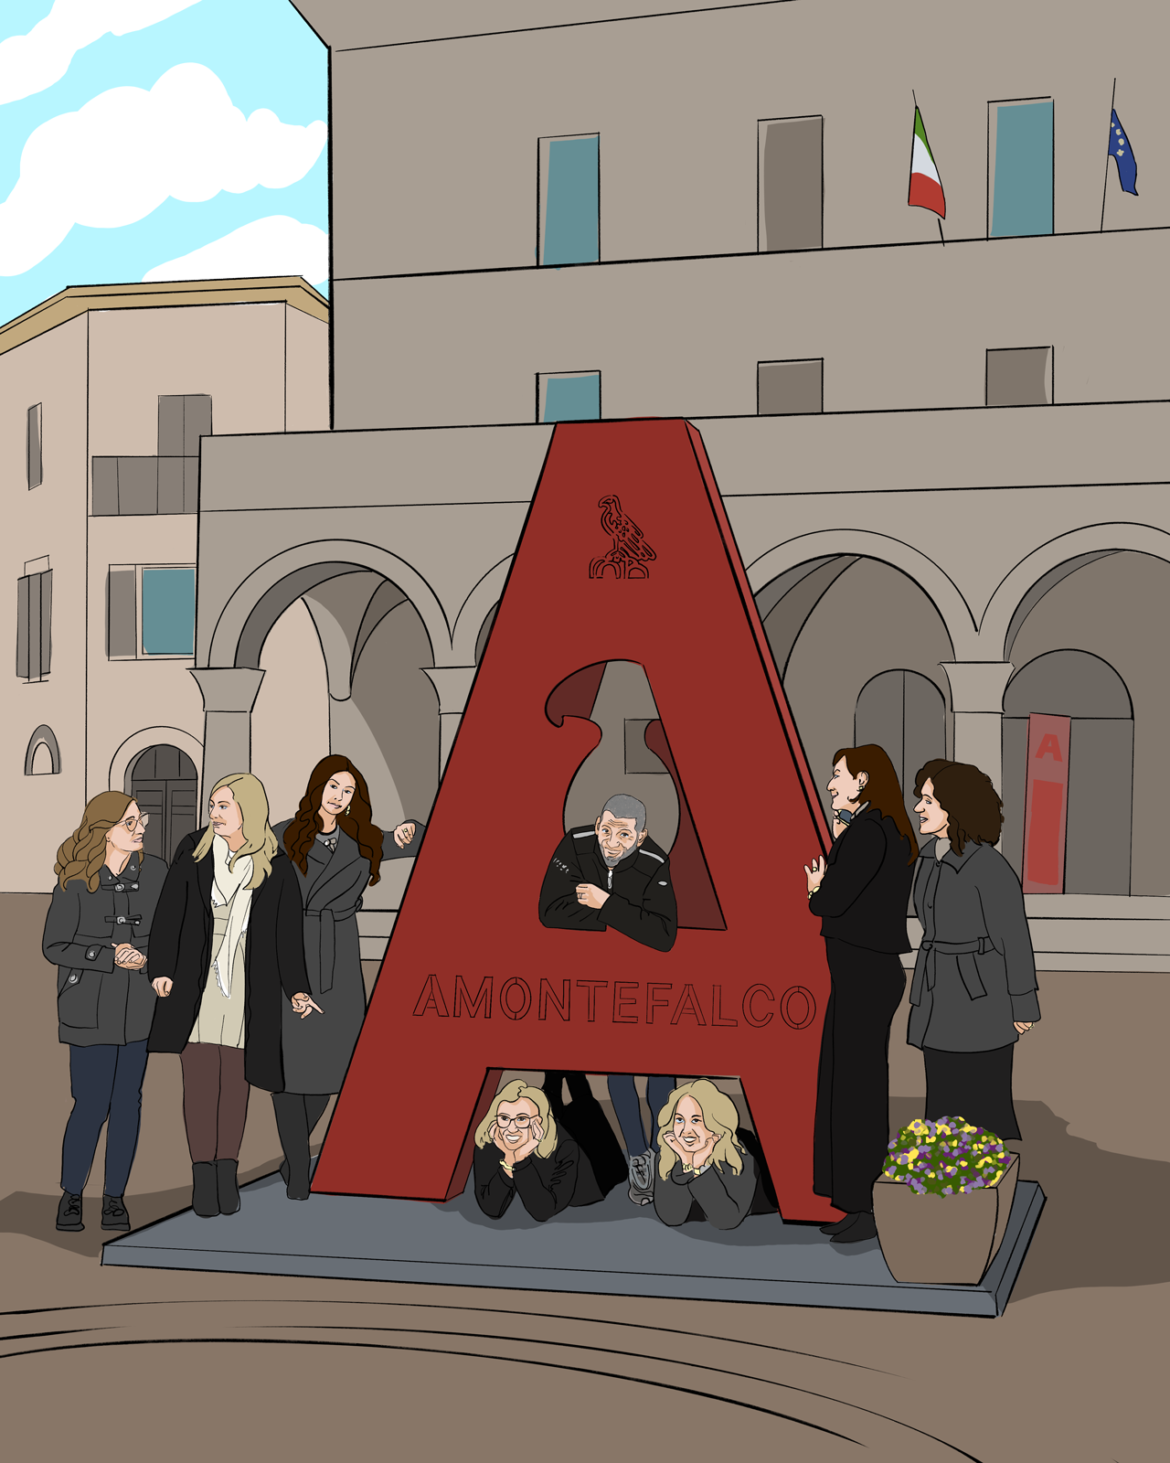 Organizers in the town square in Montefalco for the preview they called "A Montefalco"